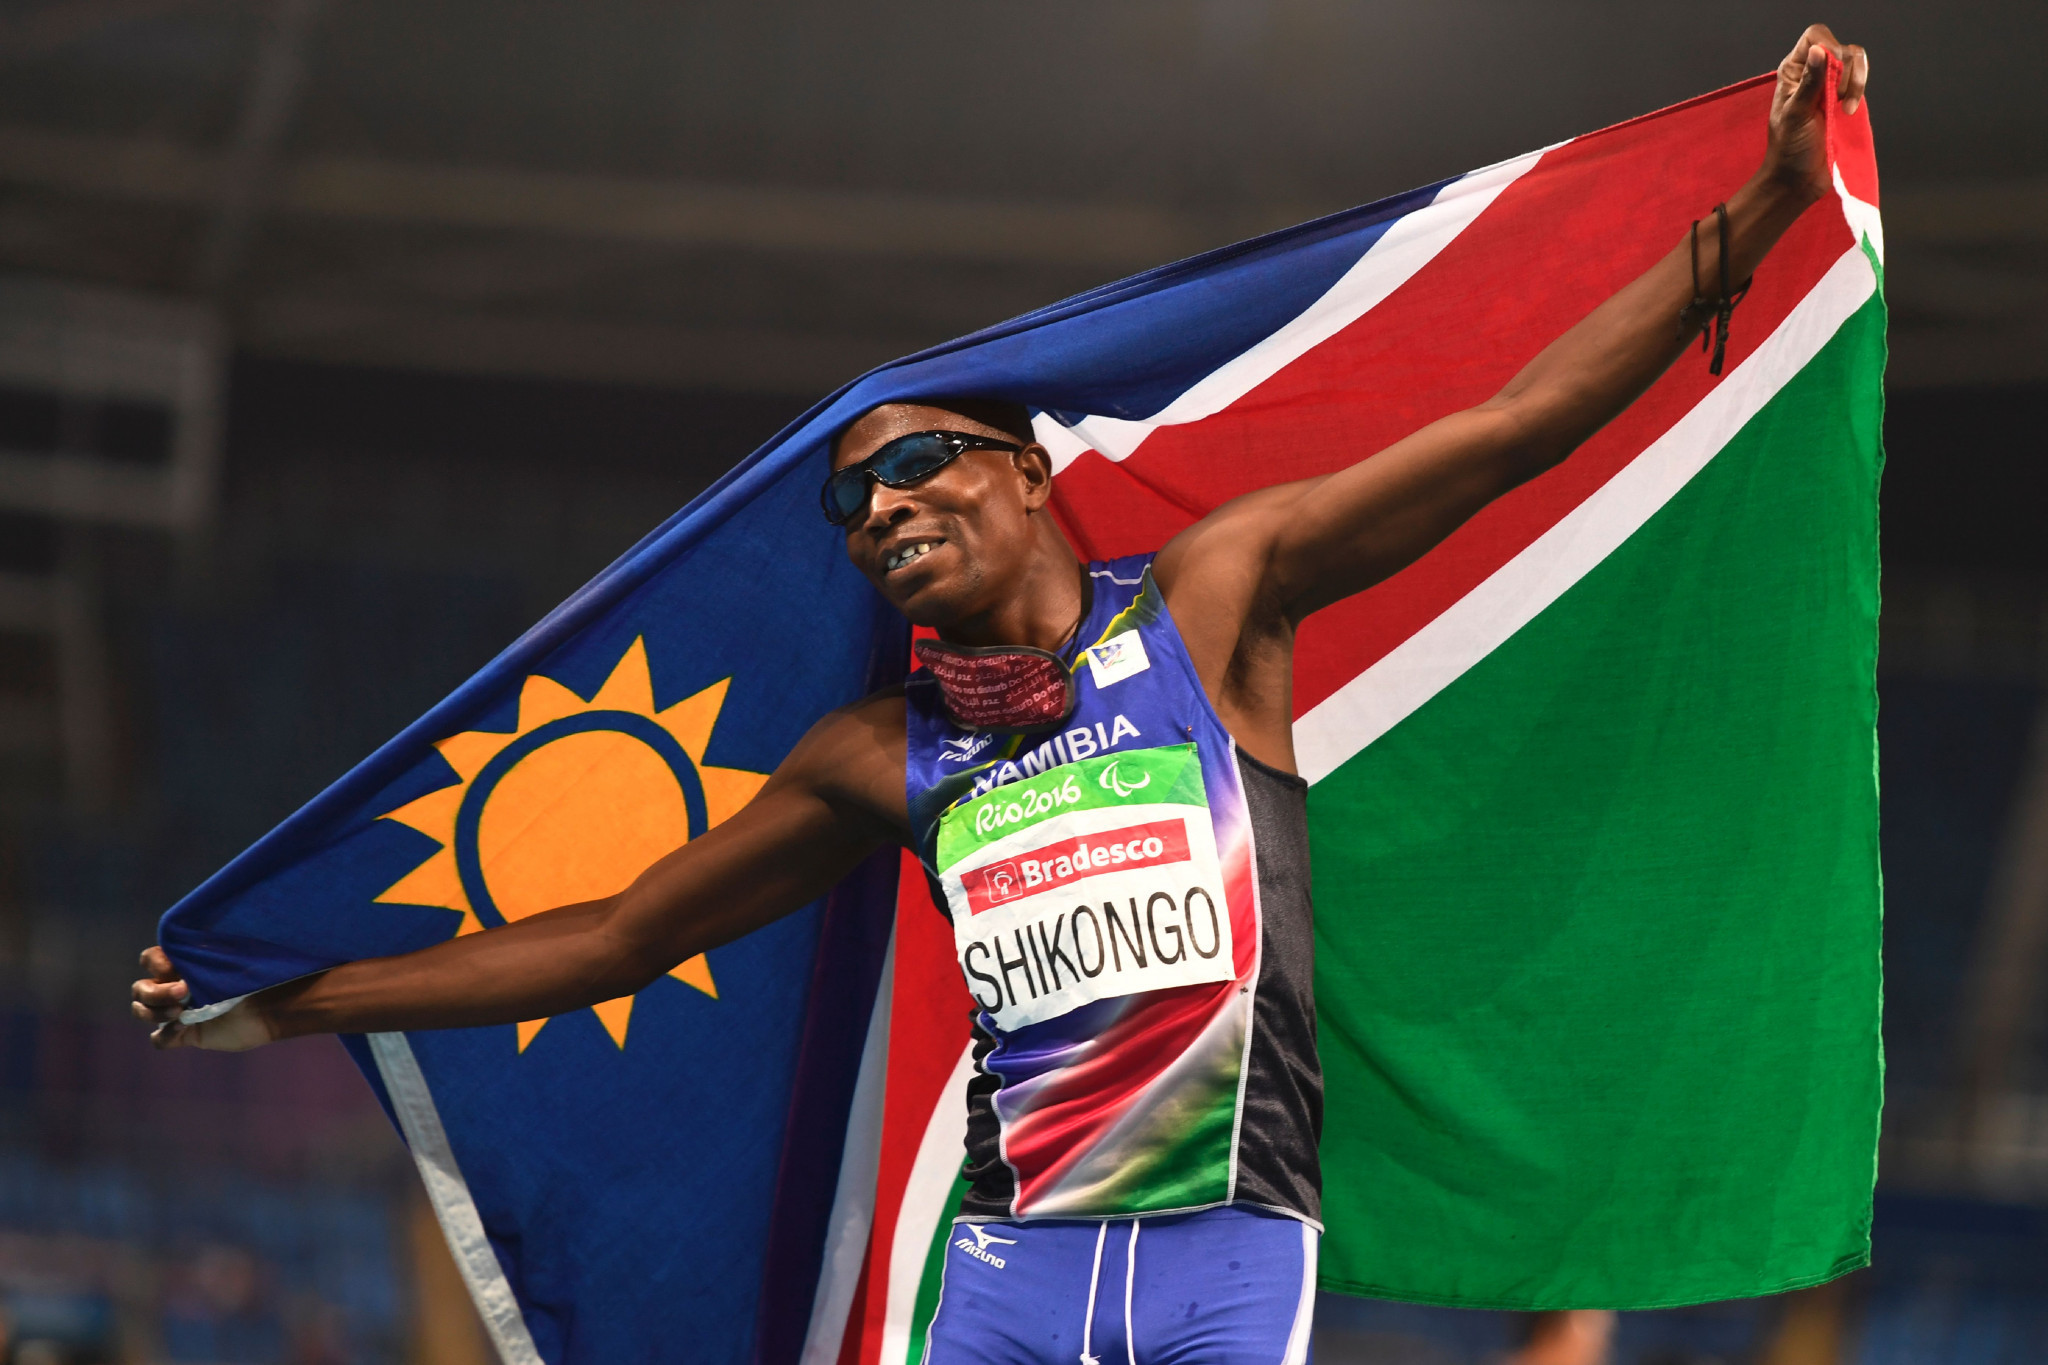 More than 20 counties in sub-Saharan Africa set for free-to-air Tokyo 2020 Paralympics coverage